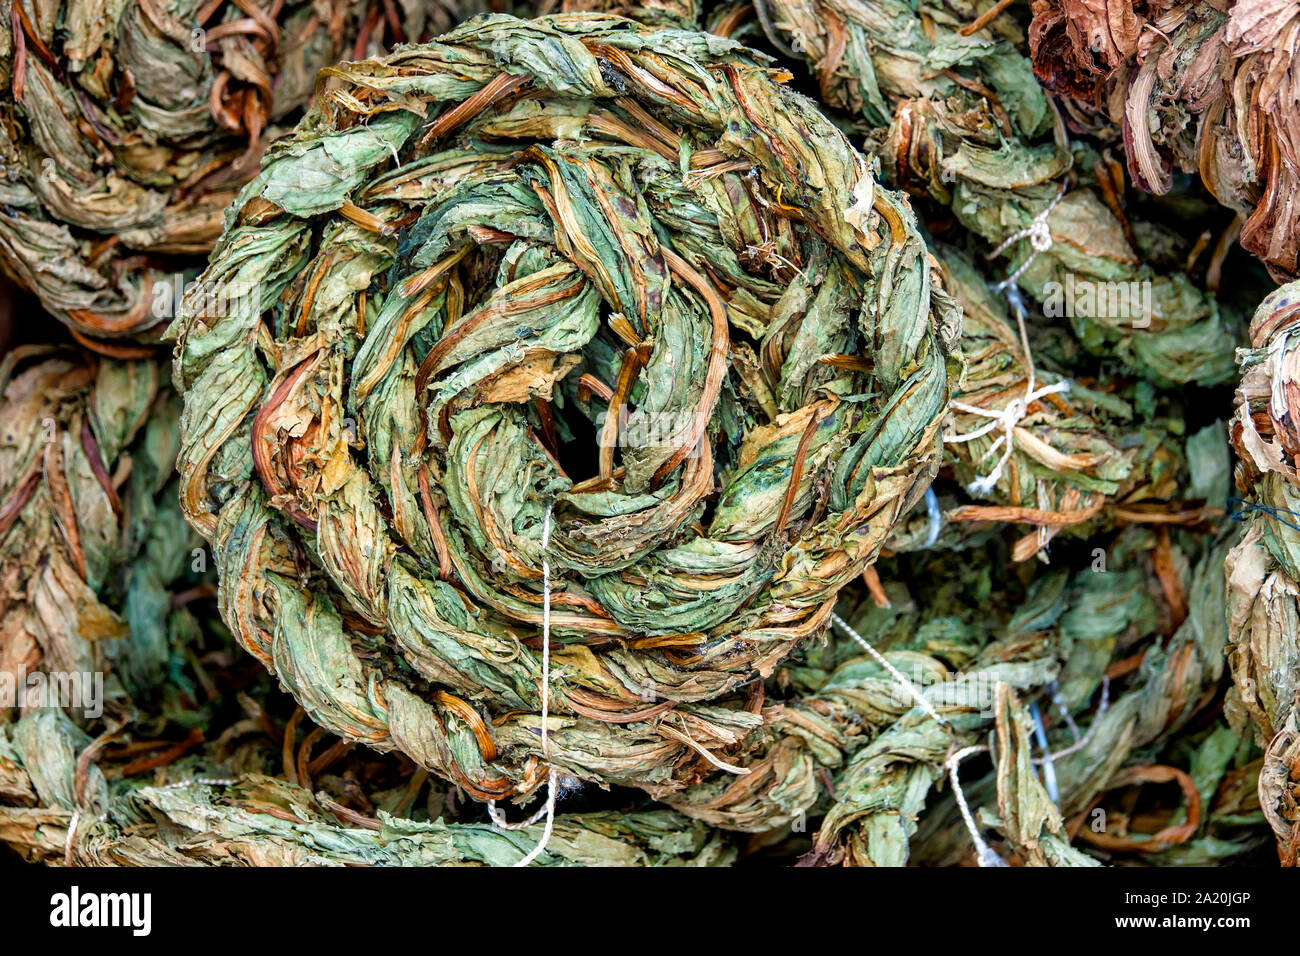 Braided dried sorrel (Rumex acetosa) leaves on display Stock Photo